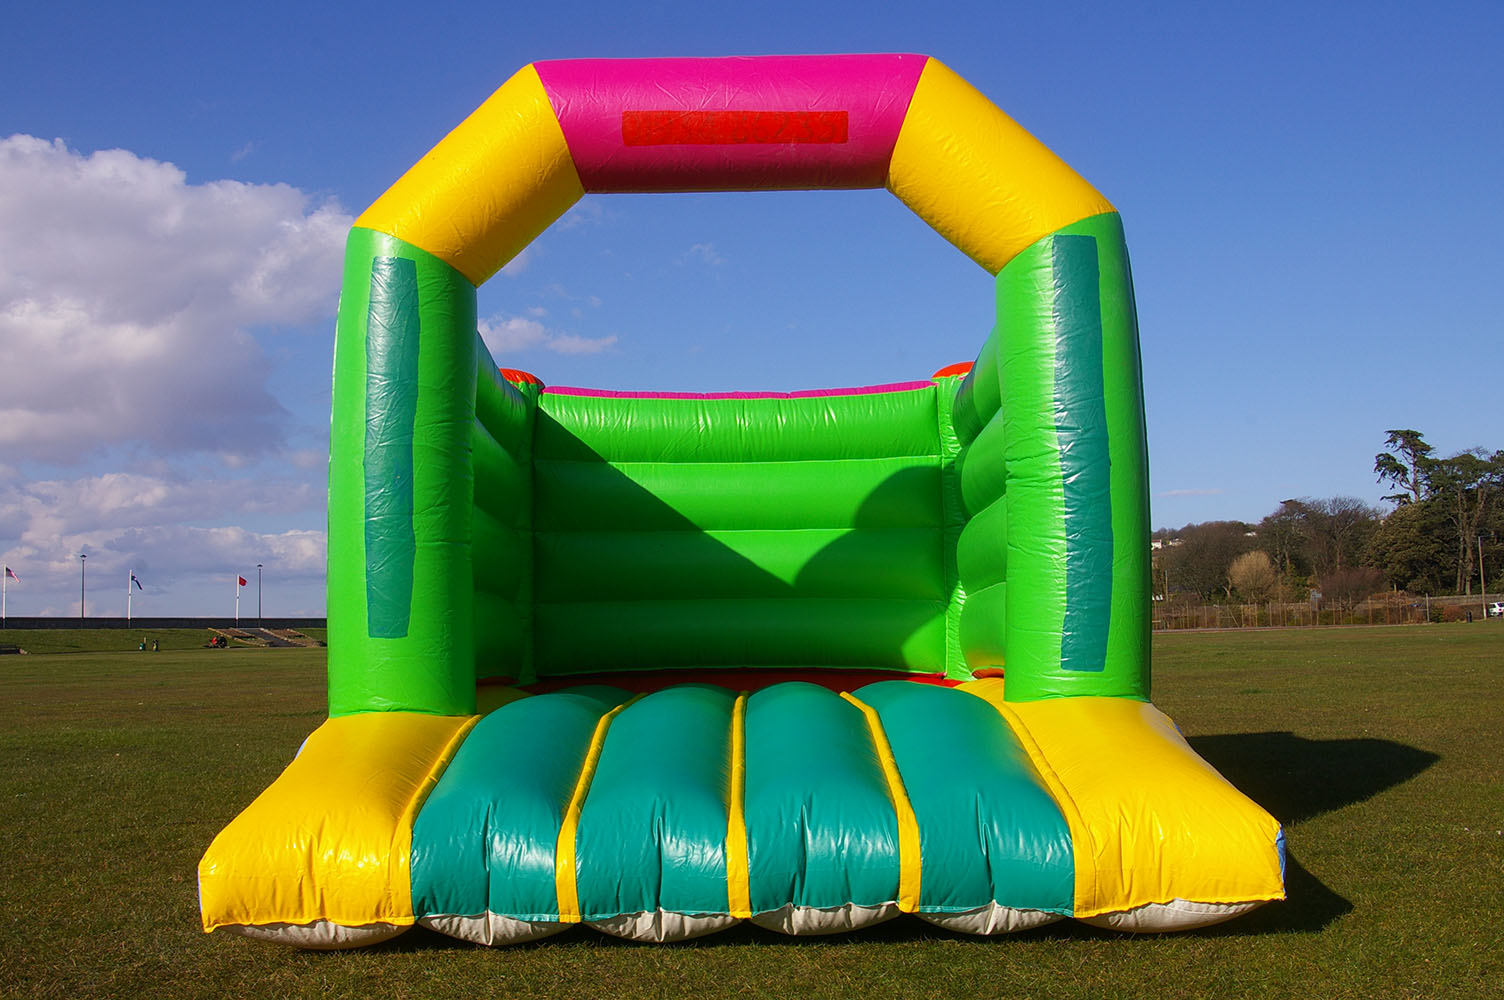 This is one of our smaller bouncy castles which is ideal for smaller gardens or halls. It's super bouncy and customisable with banners to give your event a special theme. Suitable for children up to 11 years.